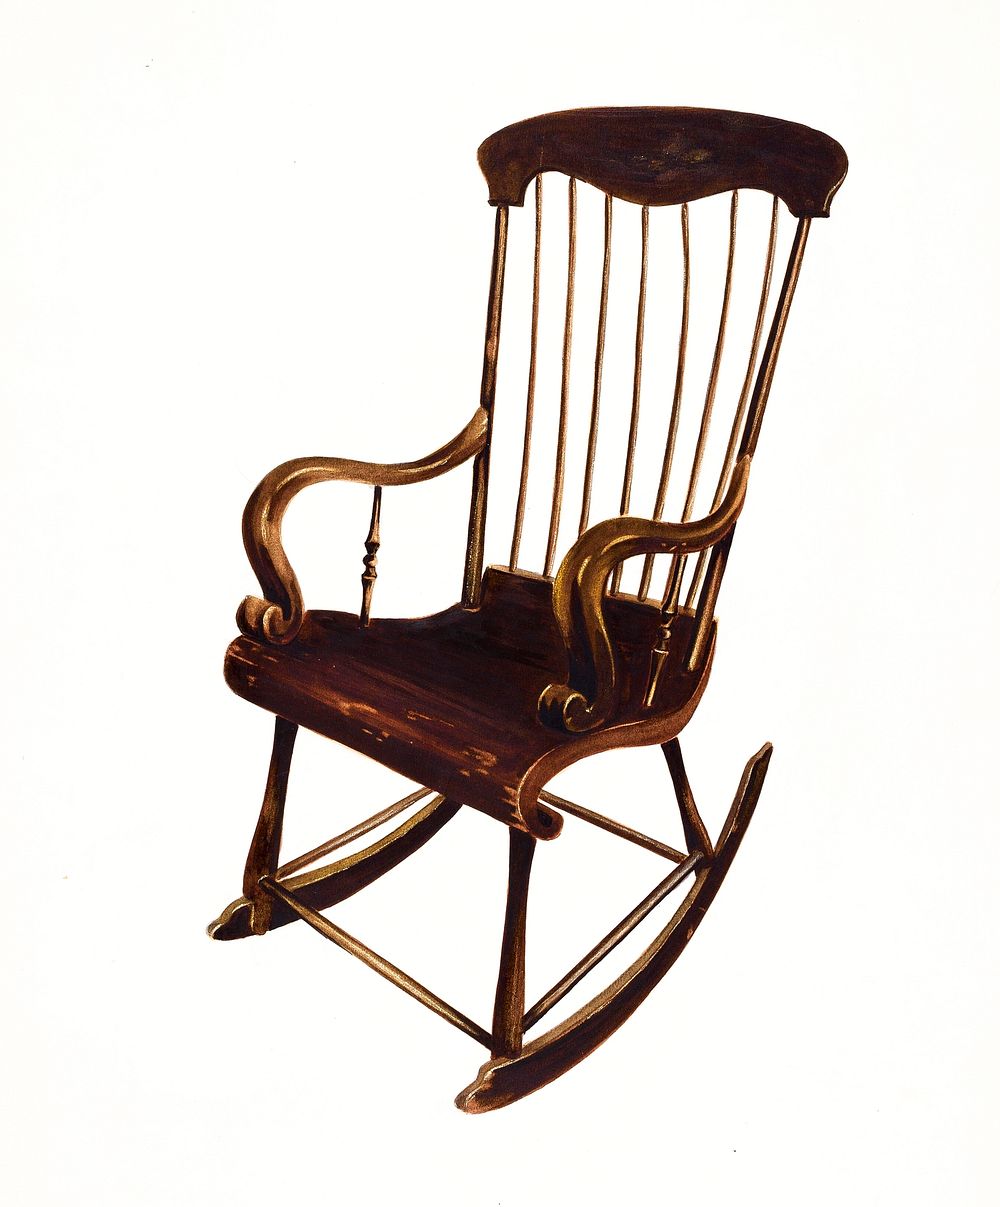 Rocking Chair: Bishop Hill (1935-1942) by William Spiecker. Original from The National Galley of Art. Digitally enhanced by…